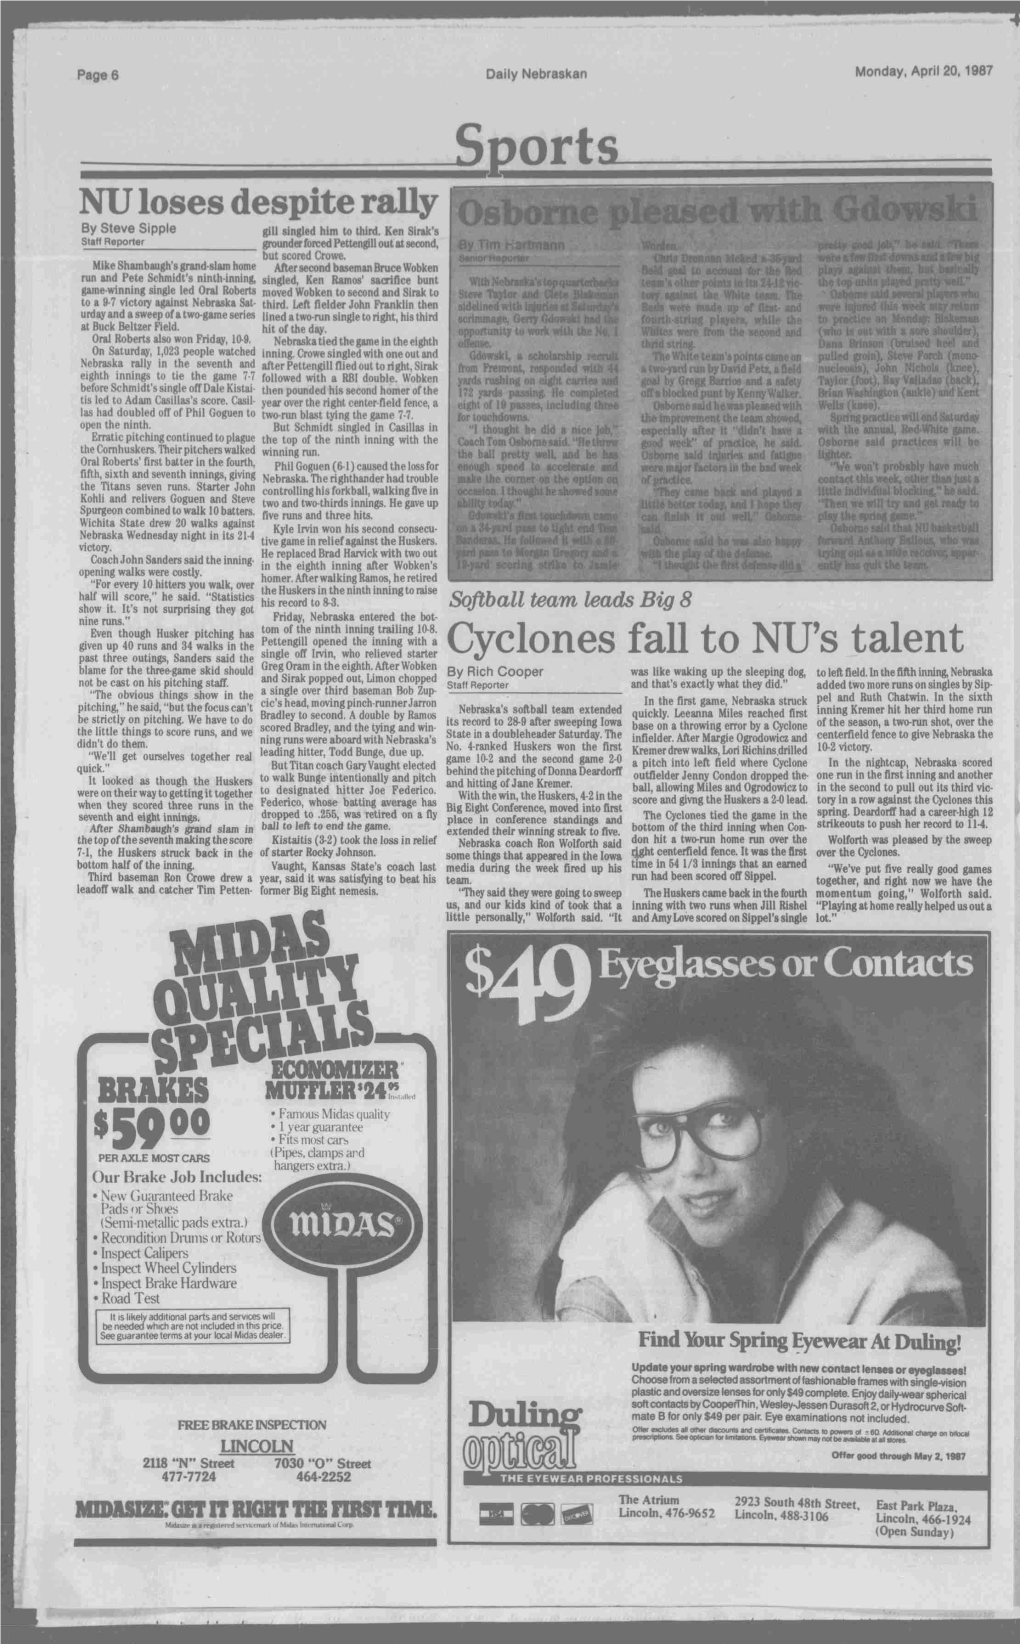 Cyclonesfall to NU's Talent